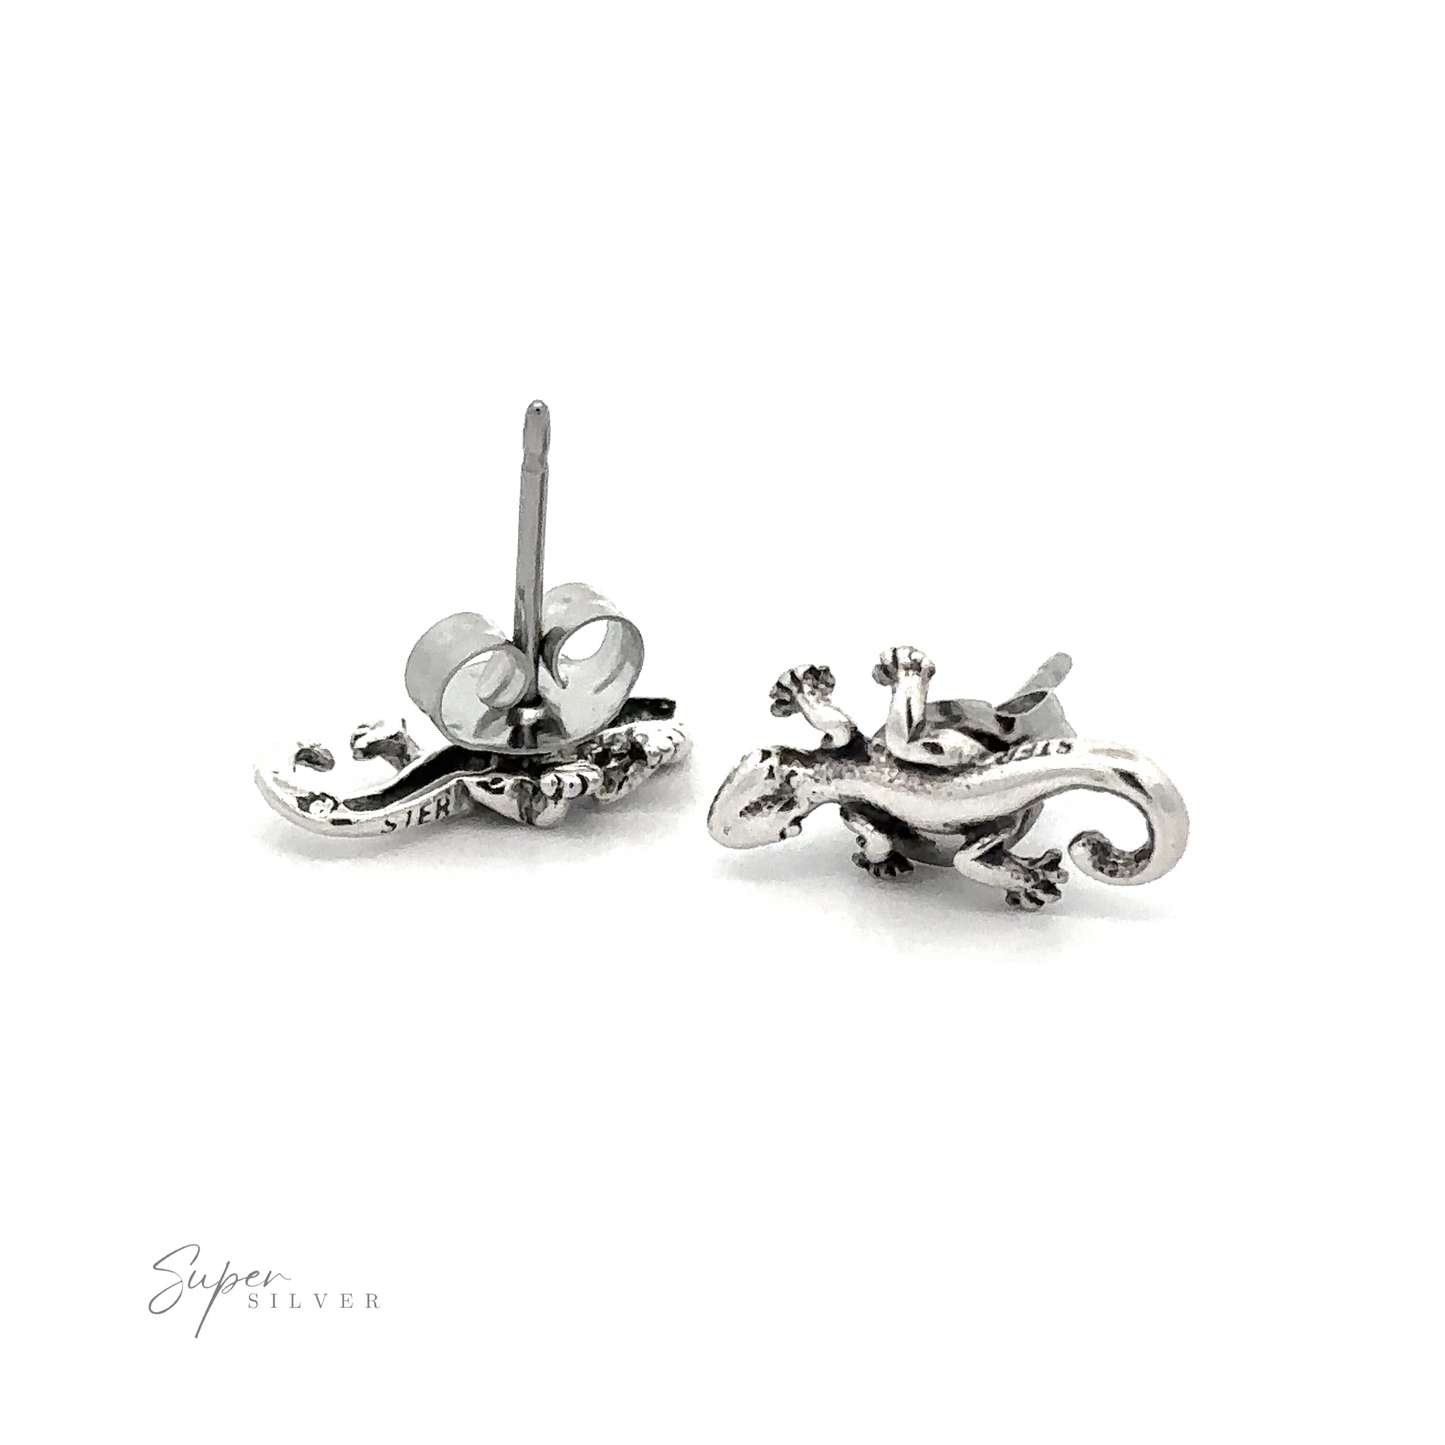 A pair of silver Lizard Studs on a white background.